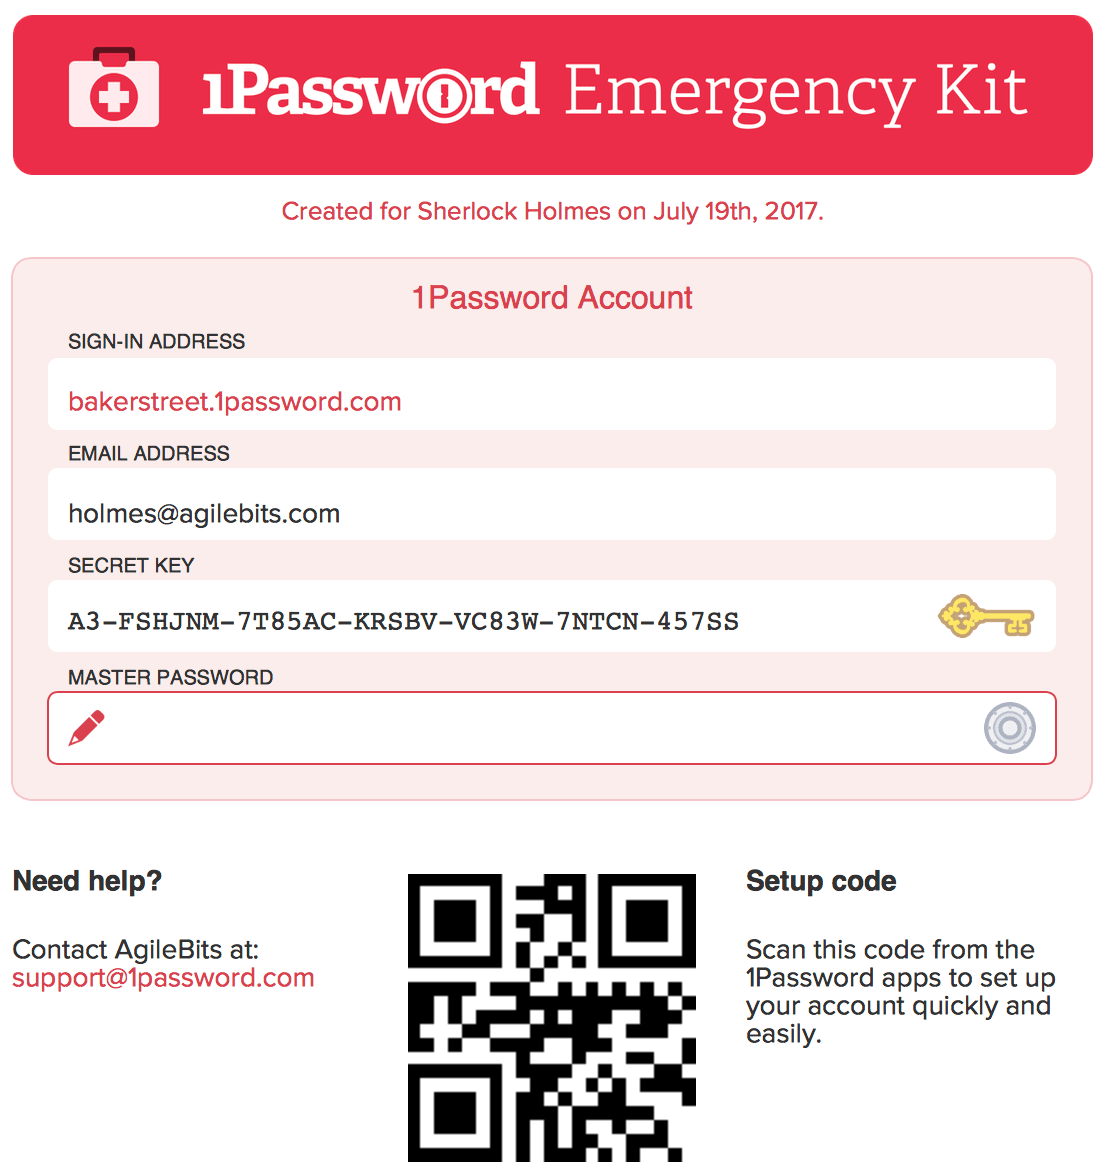 /learn/how-to-ensure-1password-is-set-for-your-digital-afterlife/emergency-kit.png